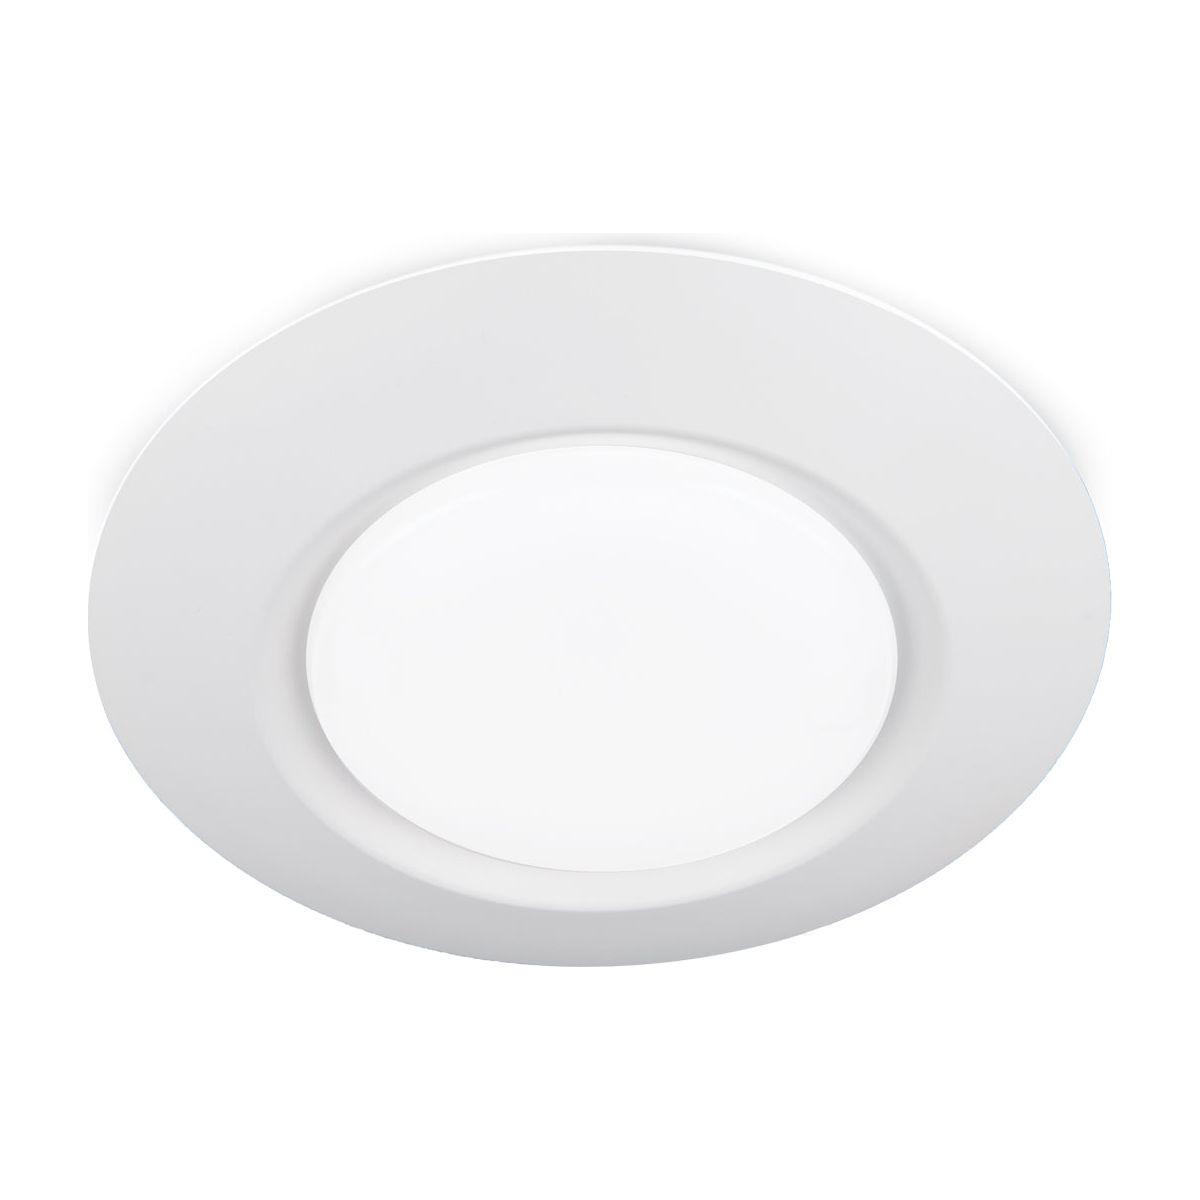 WAC Lighting - I Can't Believe It's Not Recessed LED Energy Star Flush Mount - Lights Canada